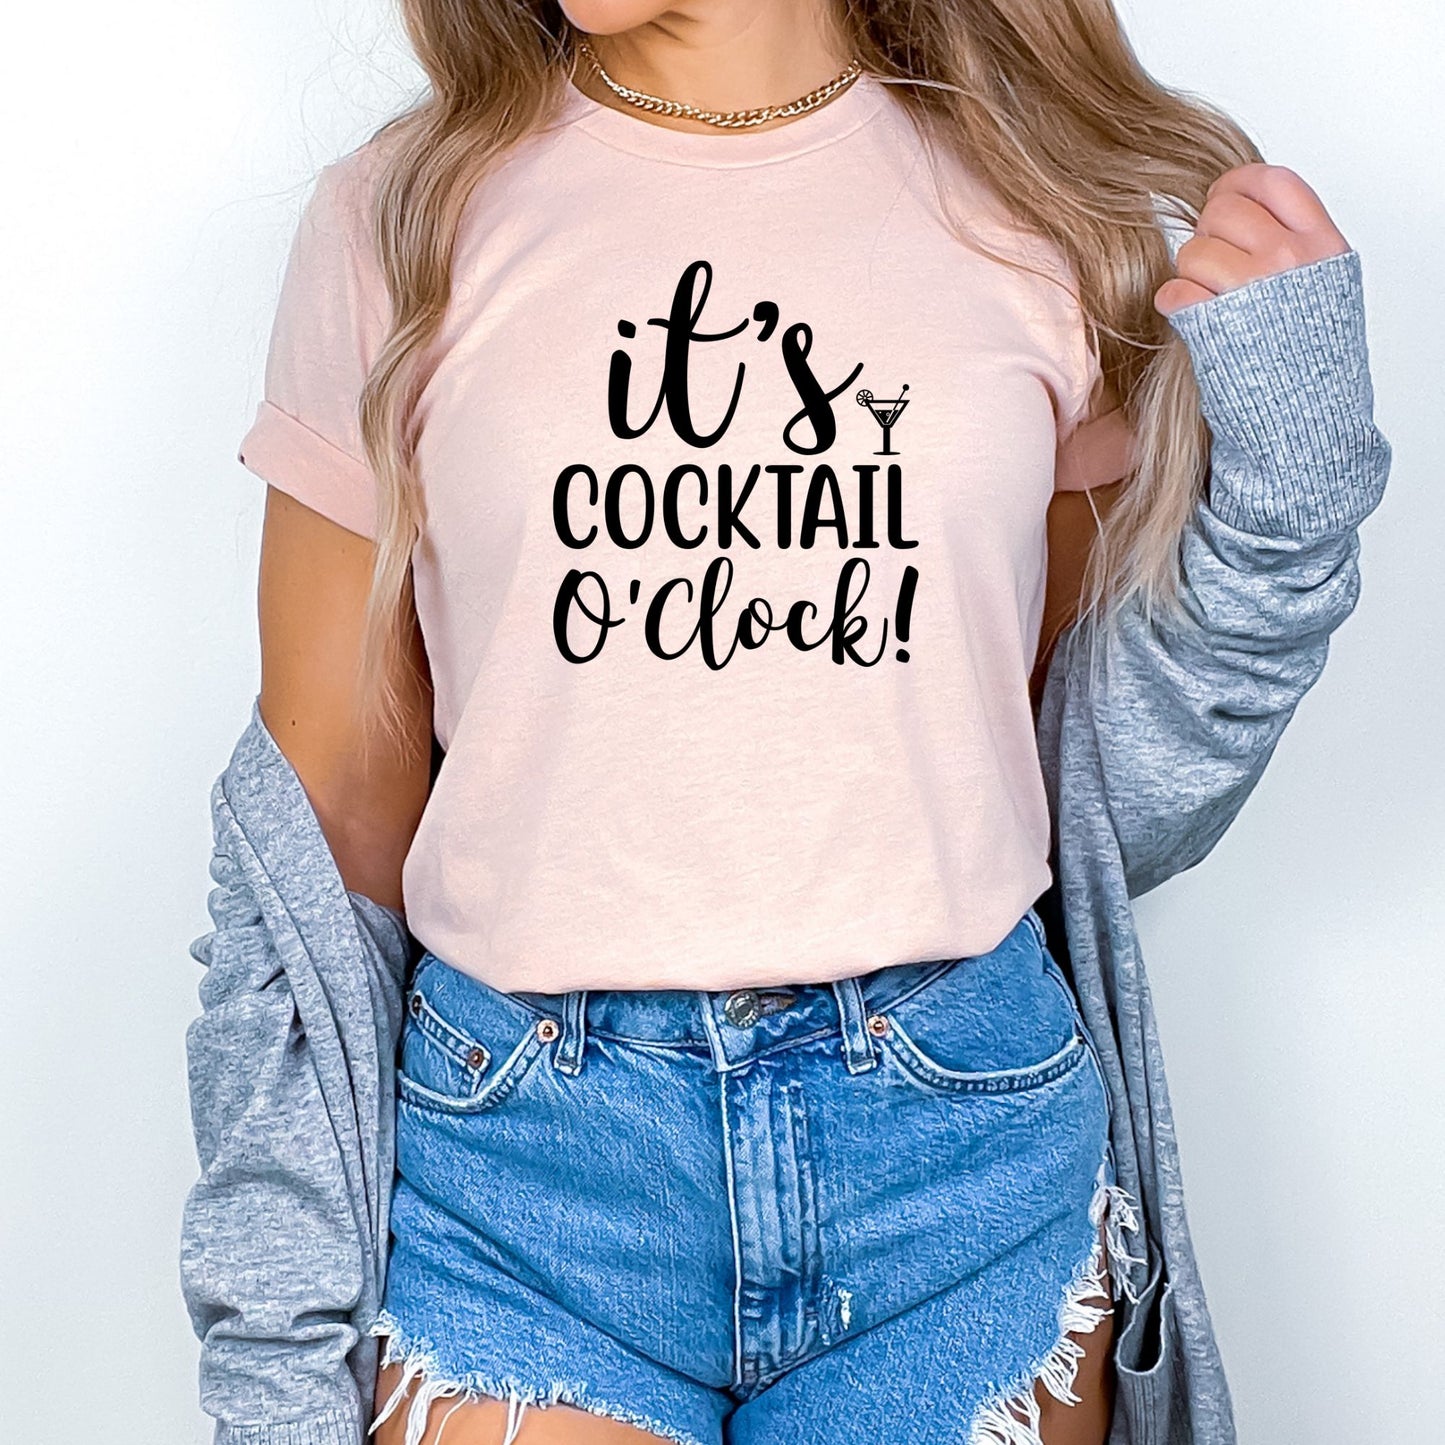 Time to Unwind: It's Cocktail O'Clock Tee